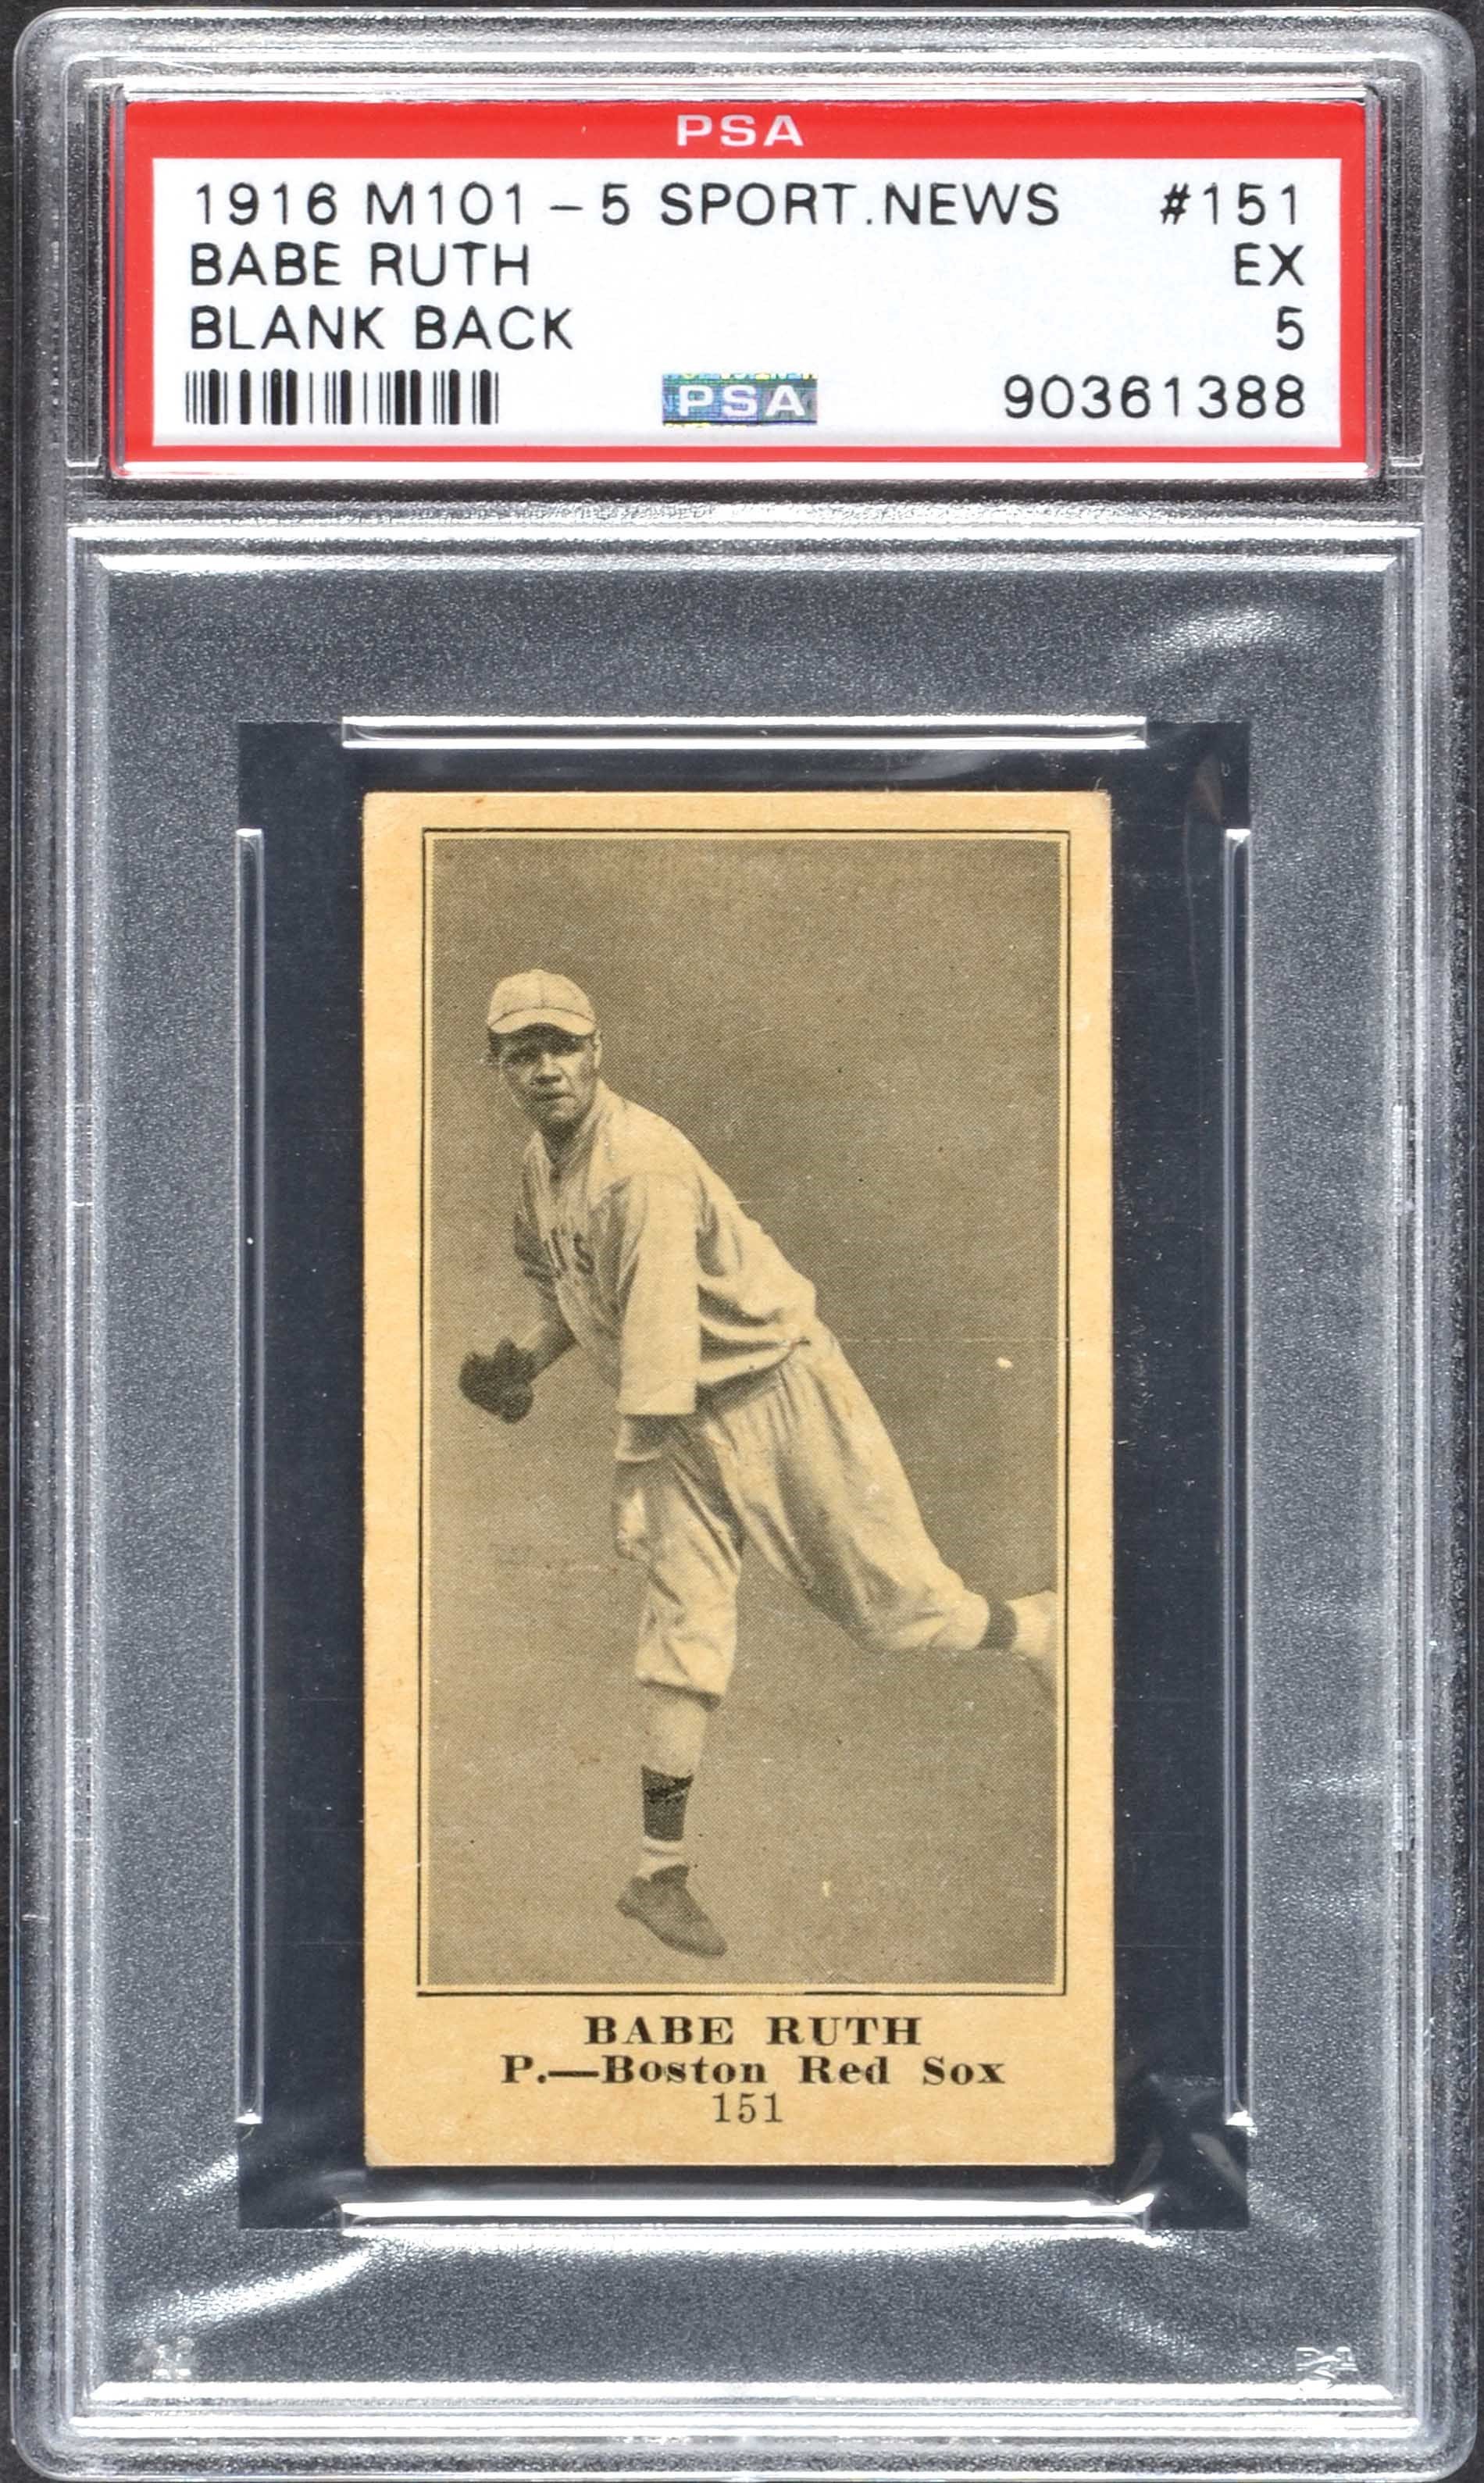 1916 Ruth Rookie Card Soars to New Heights in $10.9 Million REA Auction